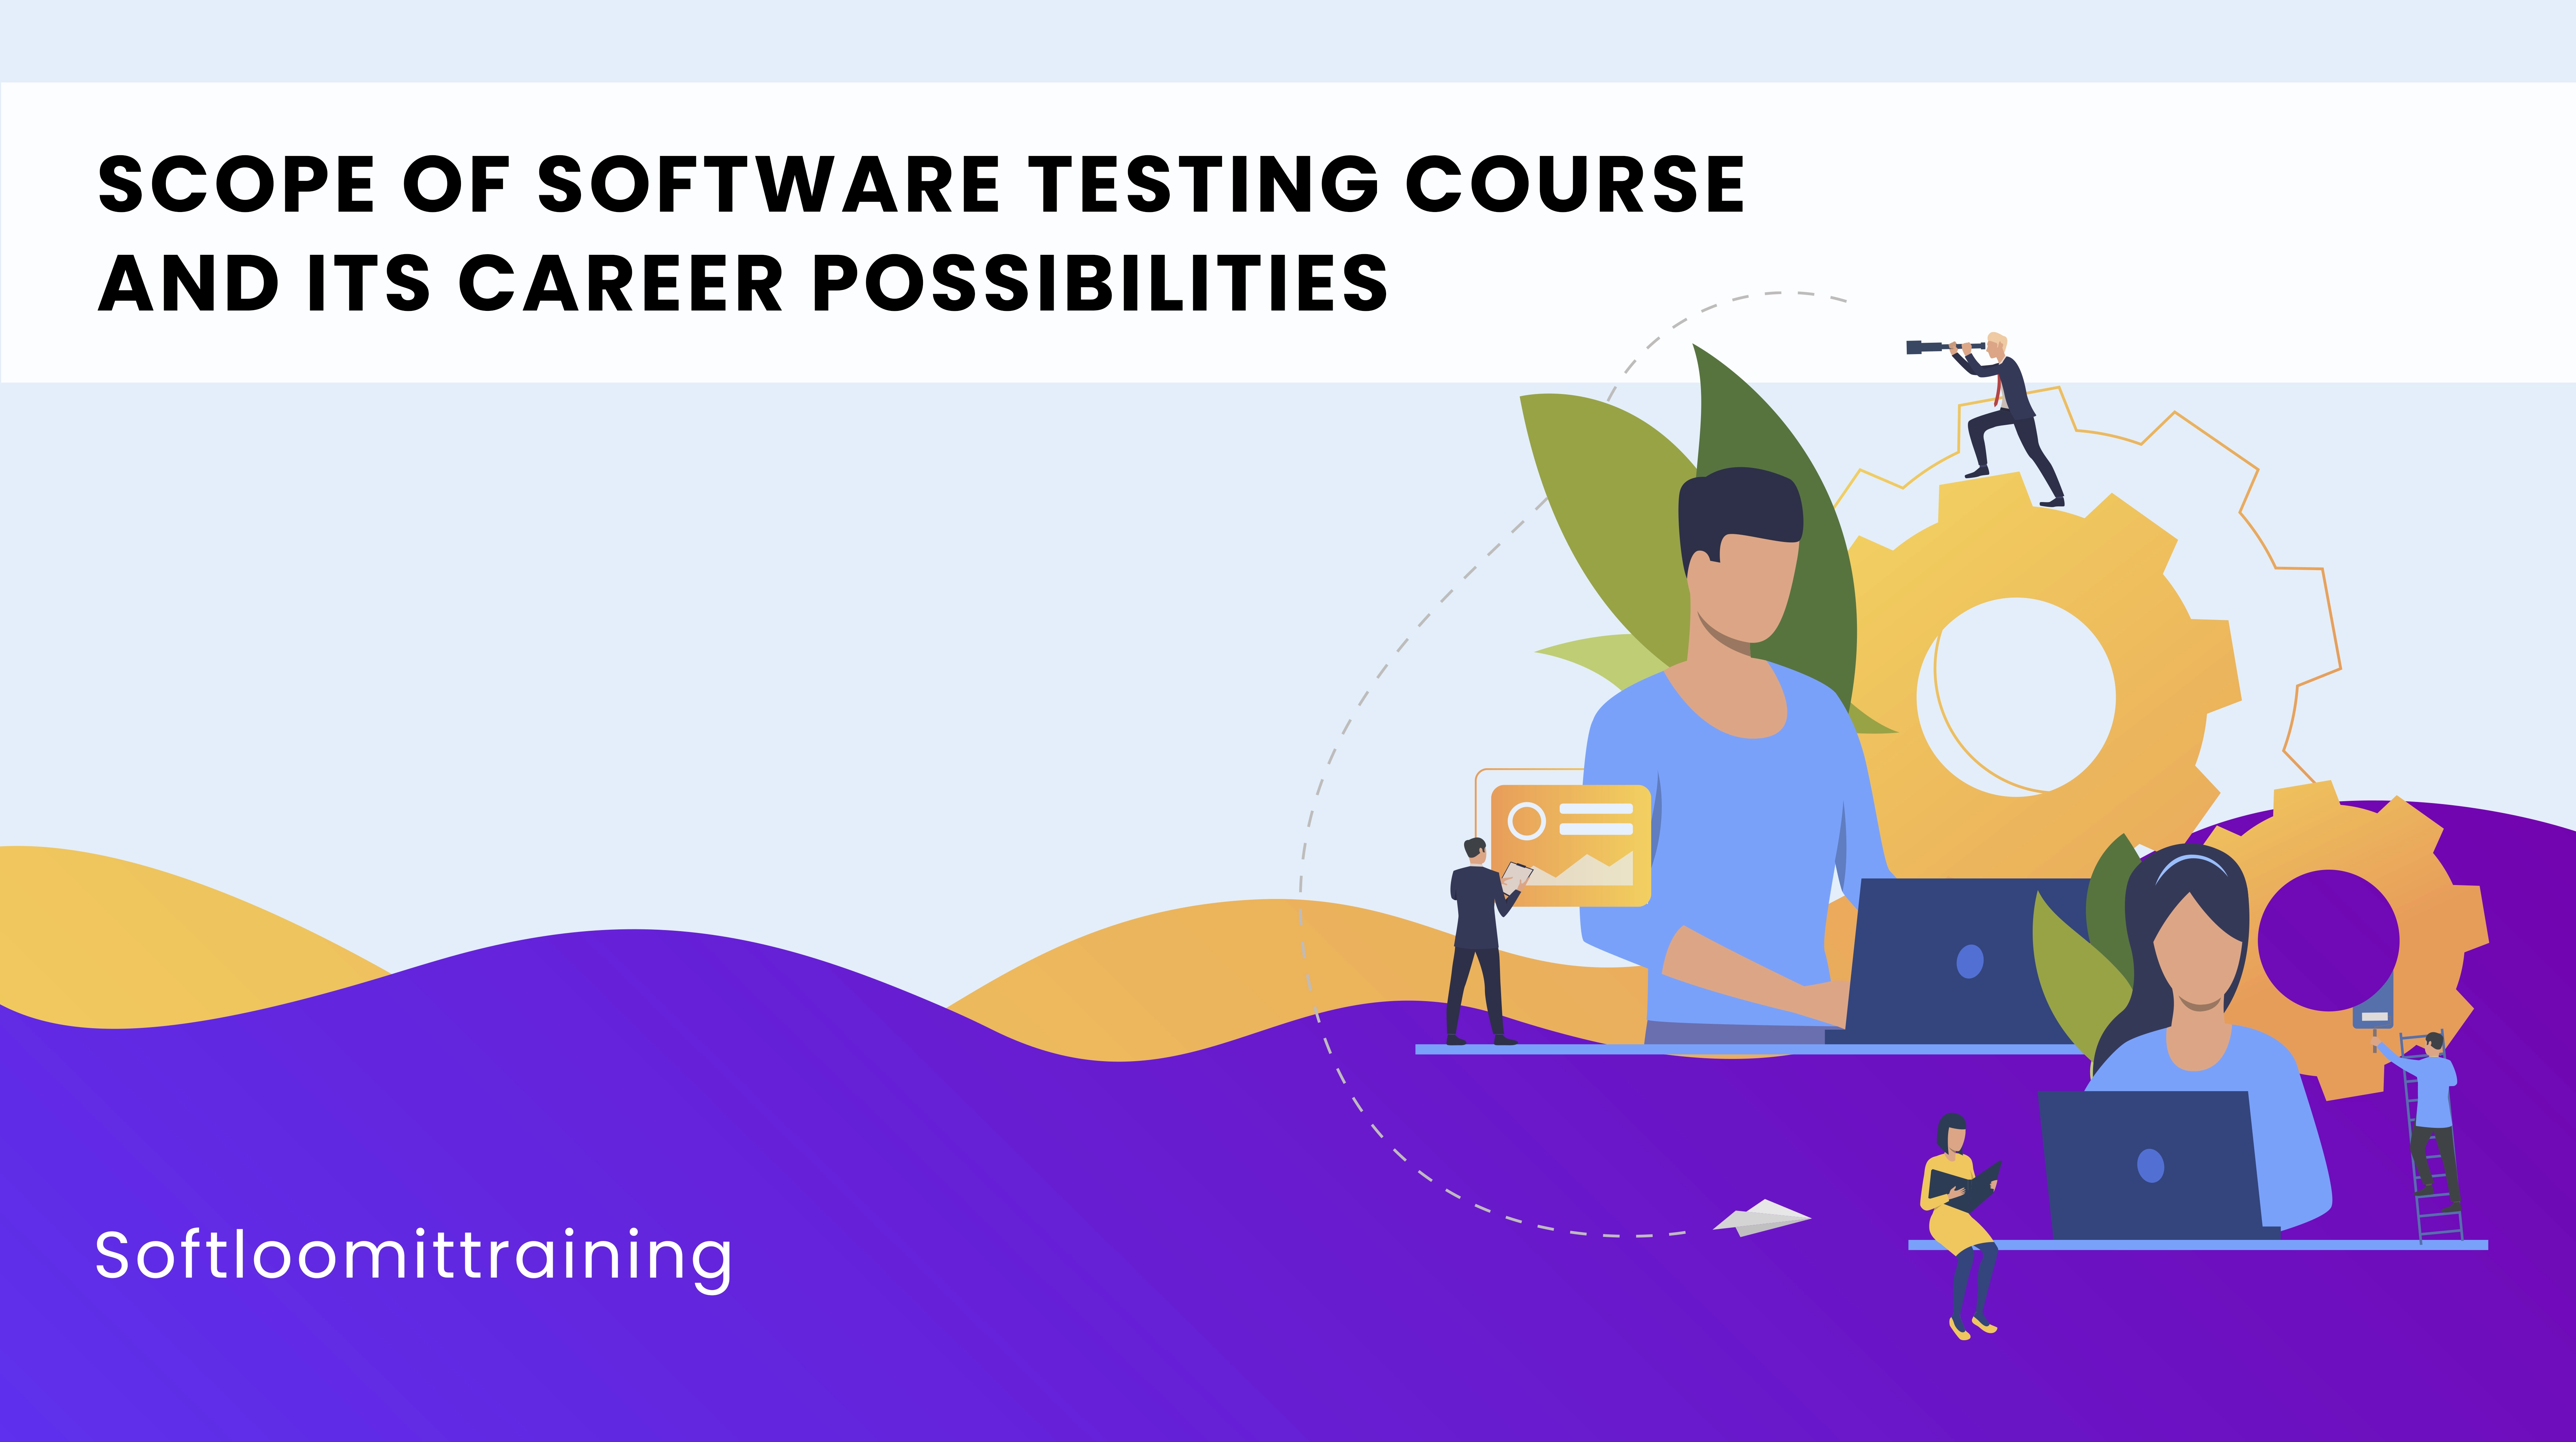 Scope of Software Testing Course